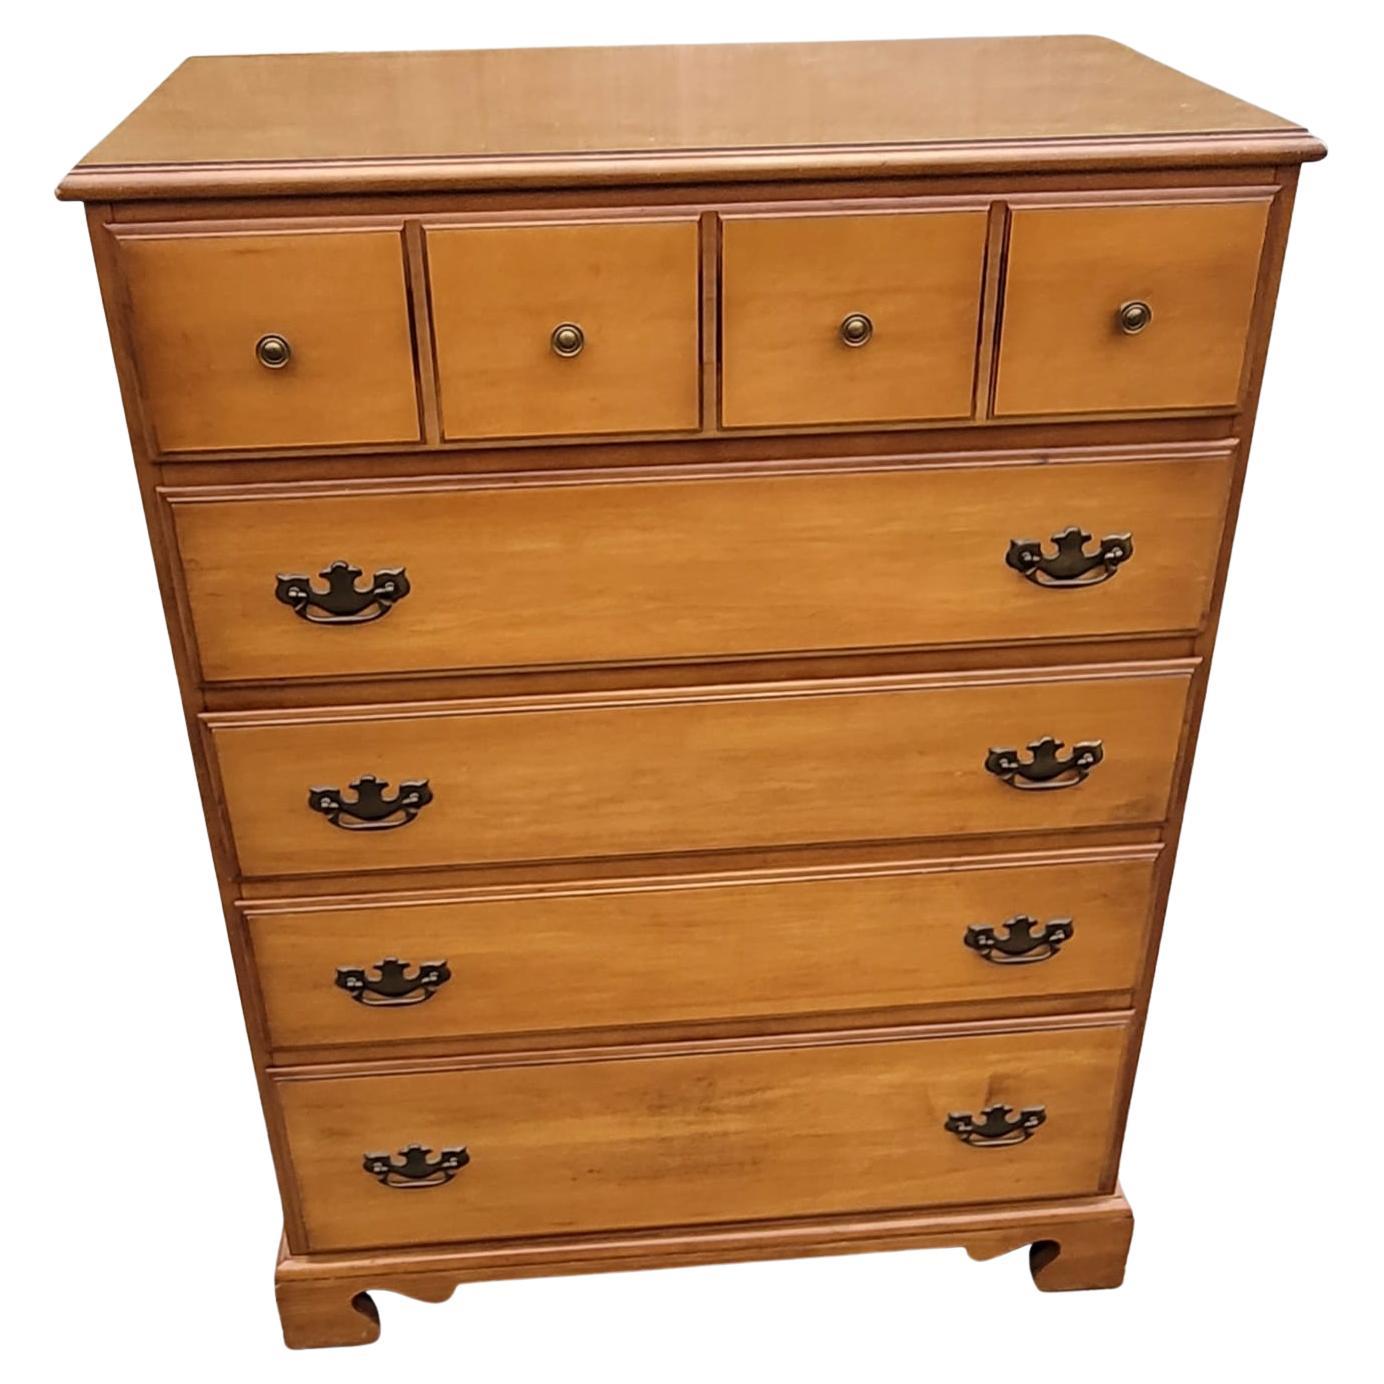 Beautiful set of Stanley's Distinctive Furniture Collection Maple chest of dfrawers.
Properly functioning drawers with dovetail construction.
Measures 36